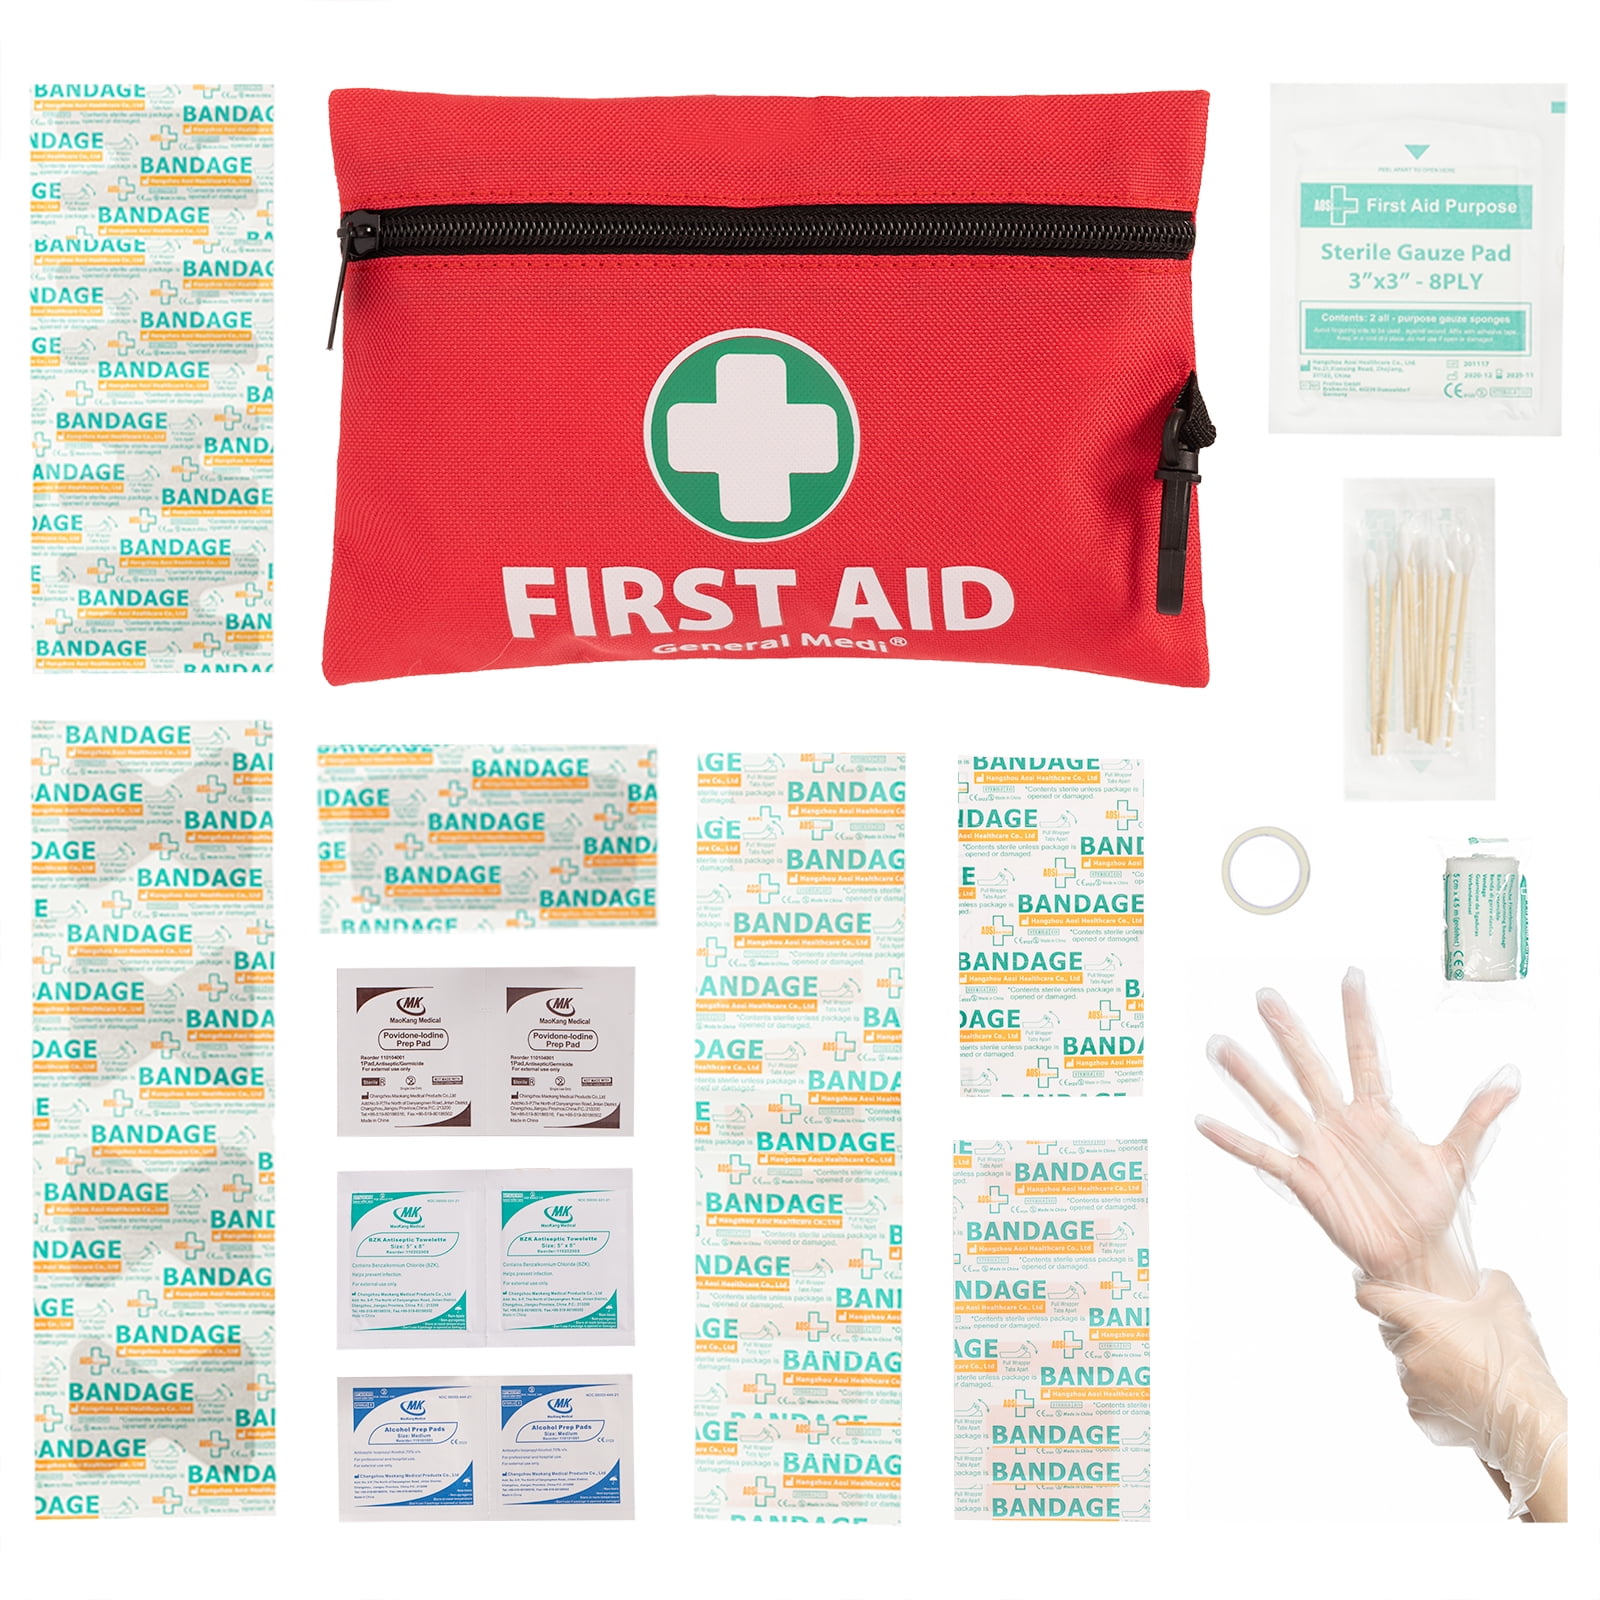 General Medi 127-pieces Roadside Car Emergency Kit Include Mini First Aid Kit, Jumper Cables,Tow Rope, Bandage, Safety Vest, Emergency Triangle, All